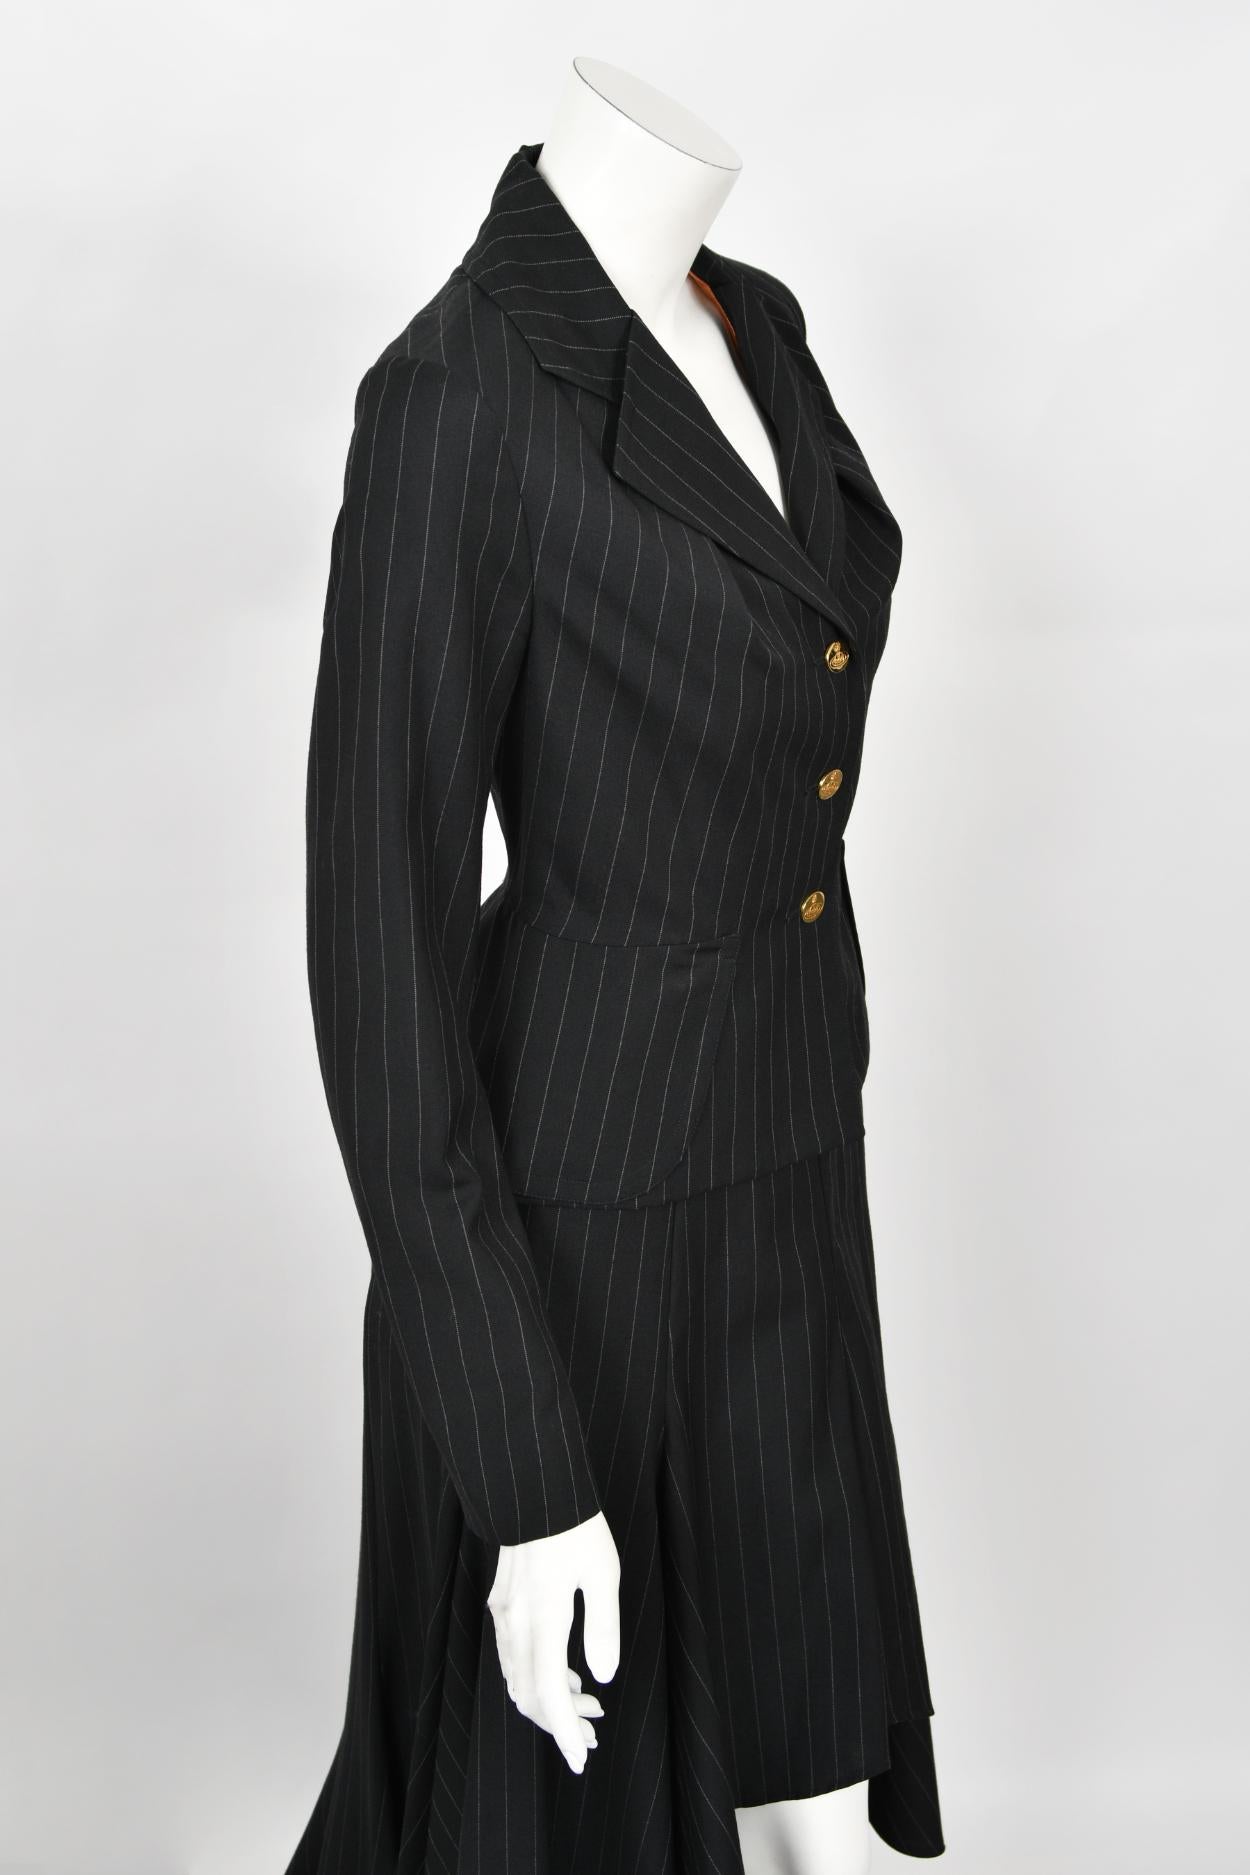 Archival 1994 Vivienne Westwood Pinstripe Wool Jacket and High-Low Trained Skirt For Sale 8